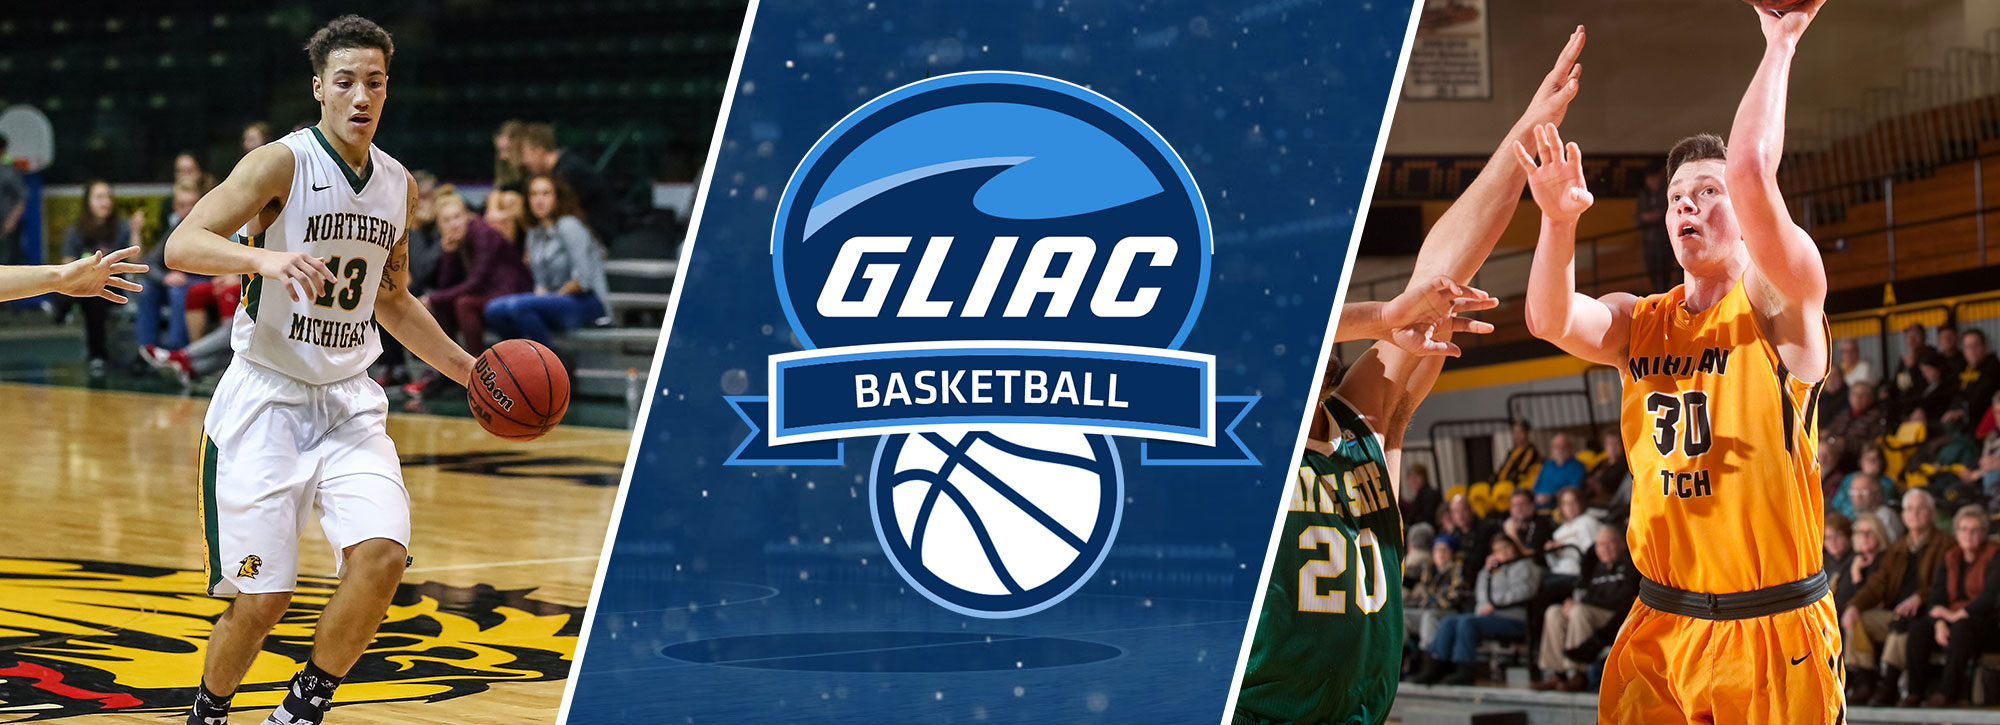 All Six Home Teams Victorious on #GLIACMBB Opening Night